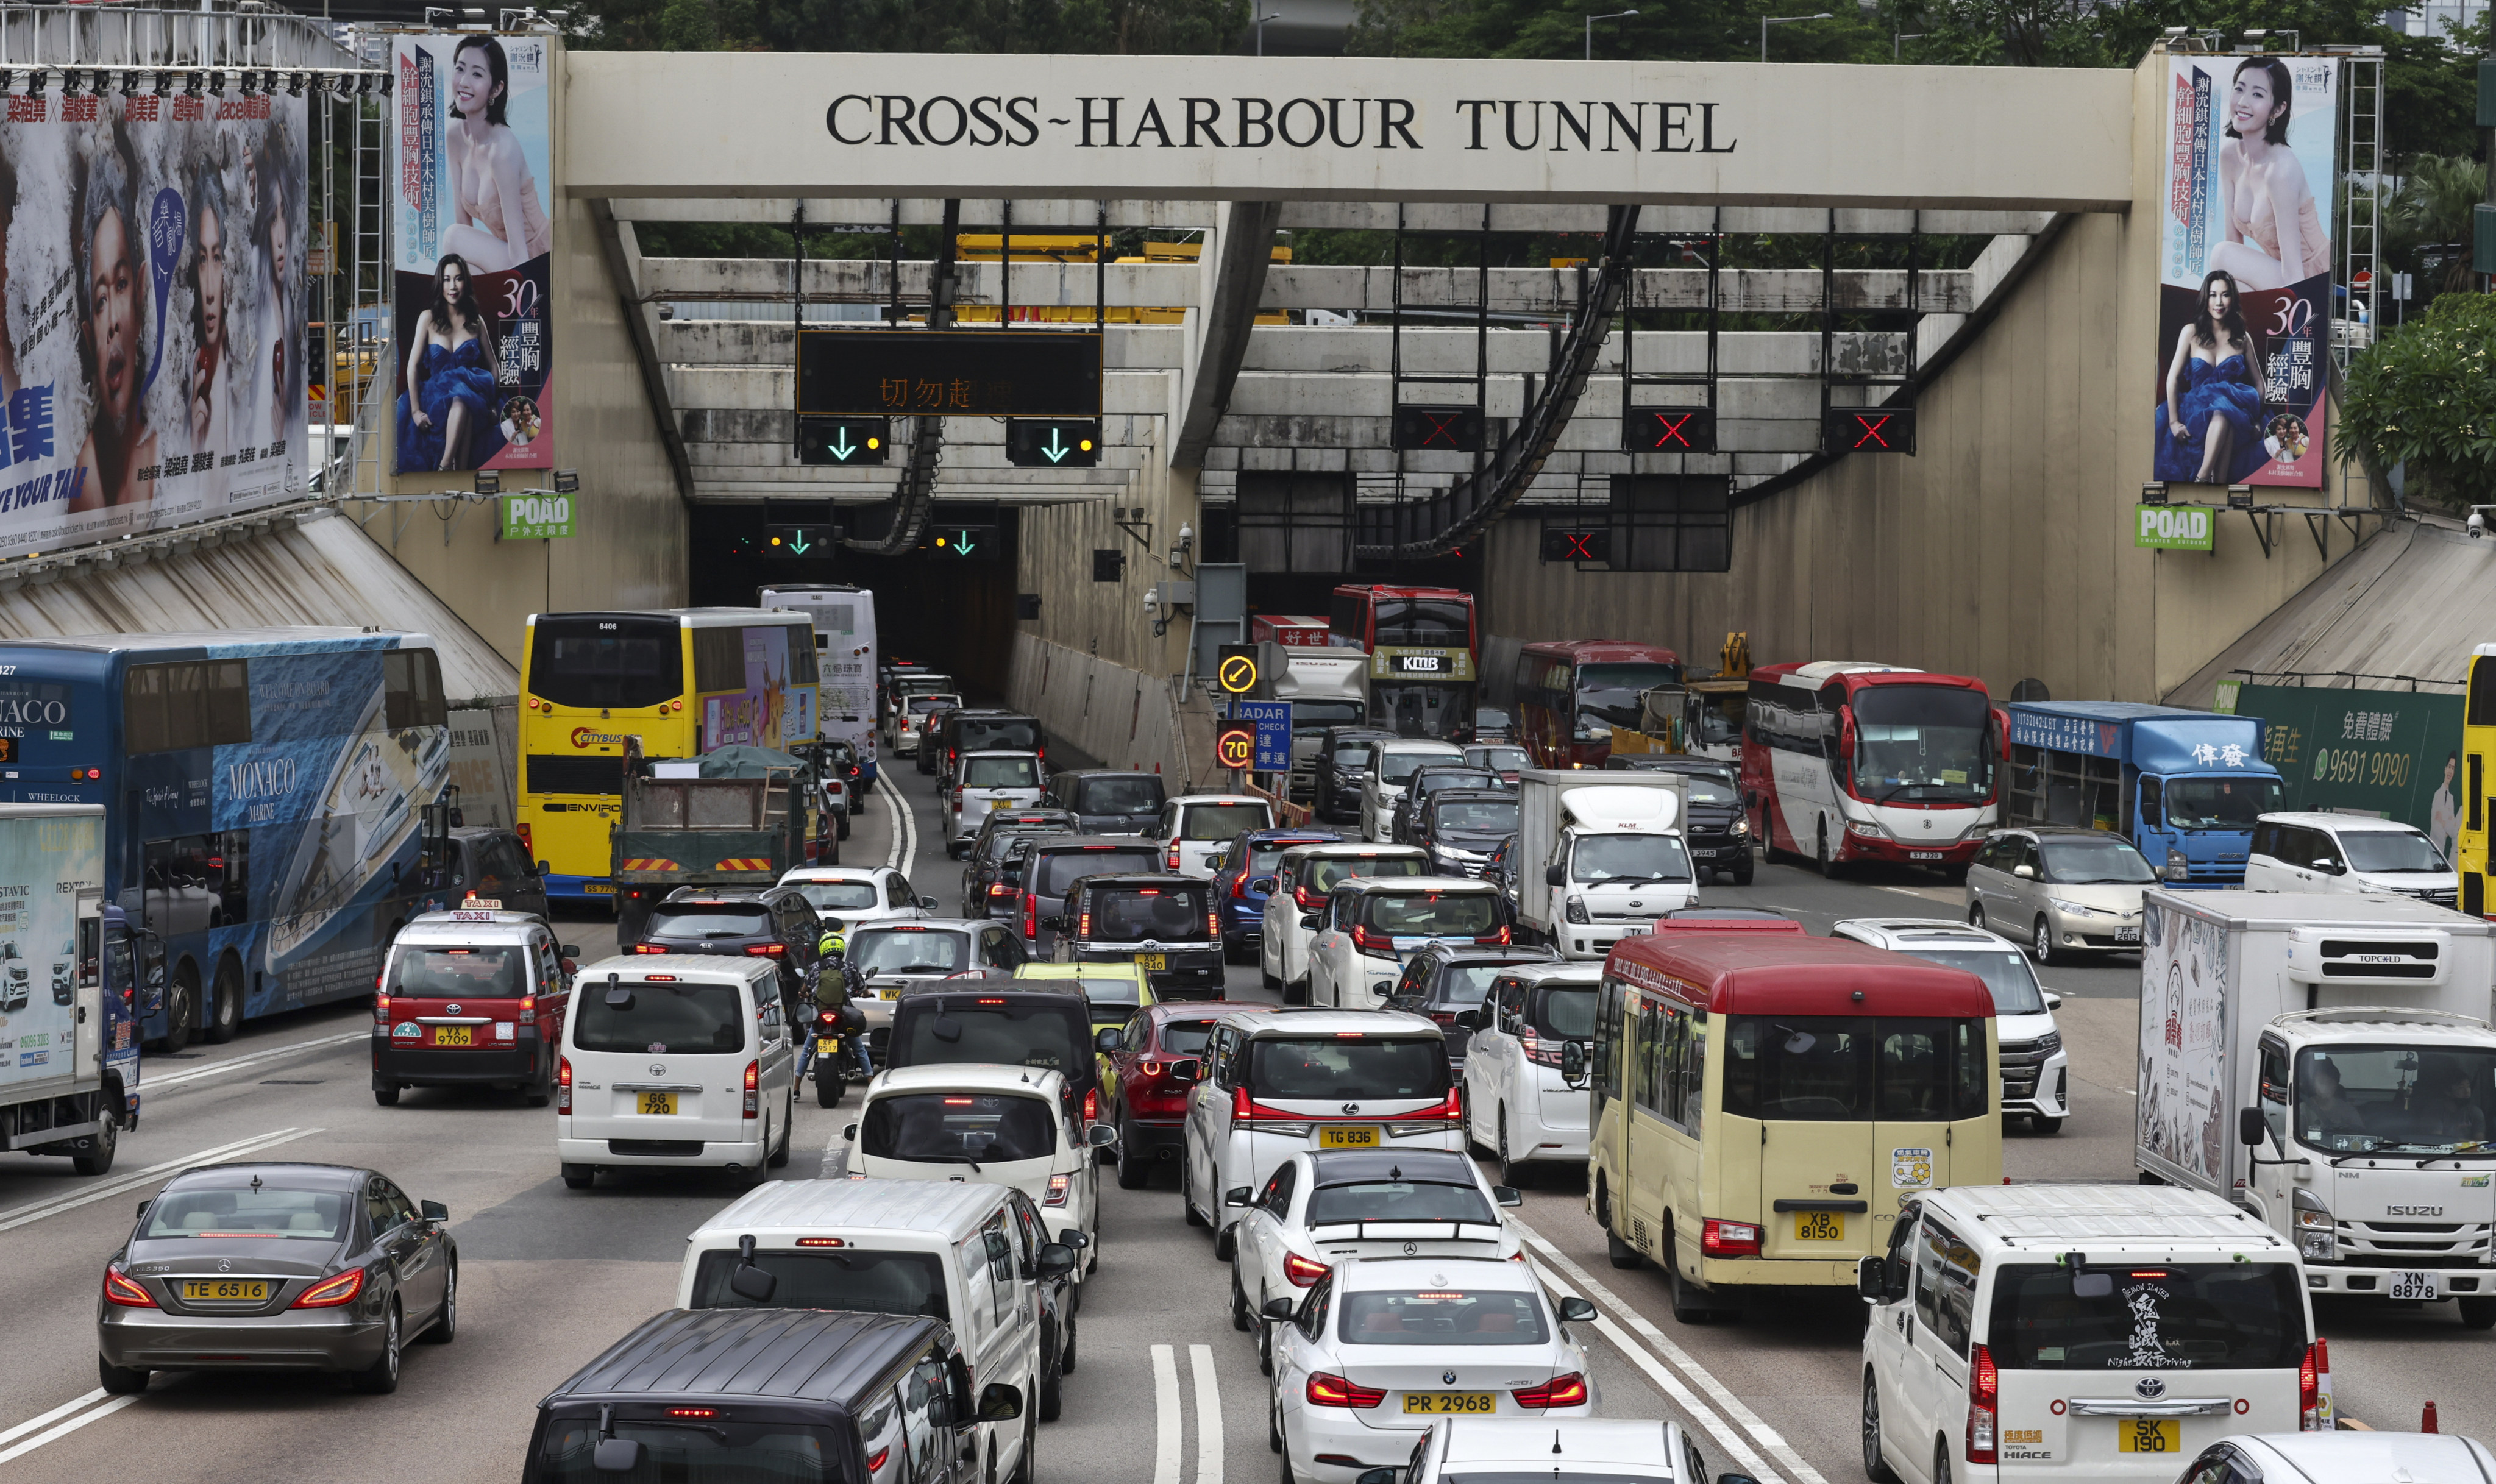 Morning rush hour traffic queues at the Cross-Harbour Tunnel. Photo: K. Y. Cheng